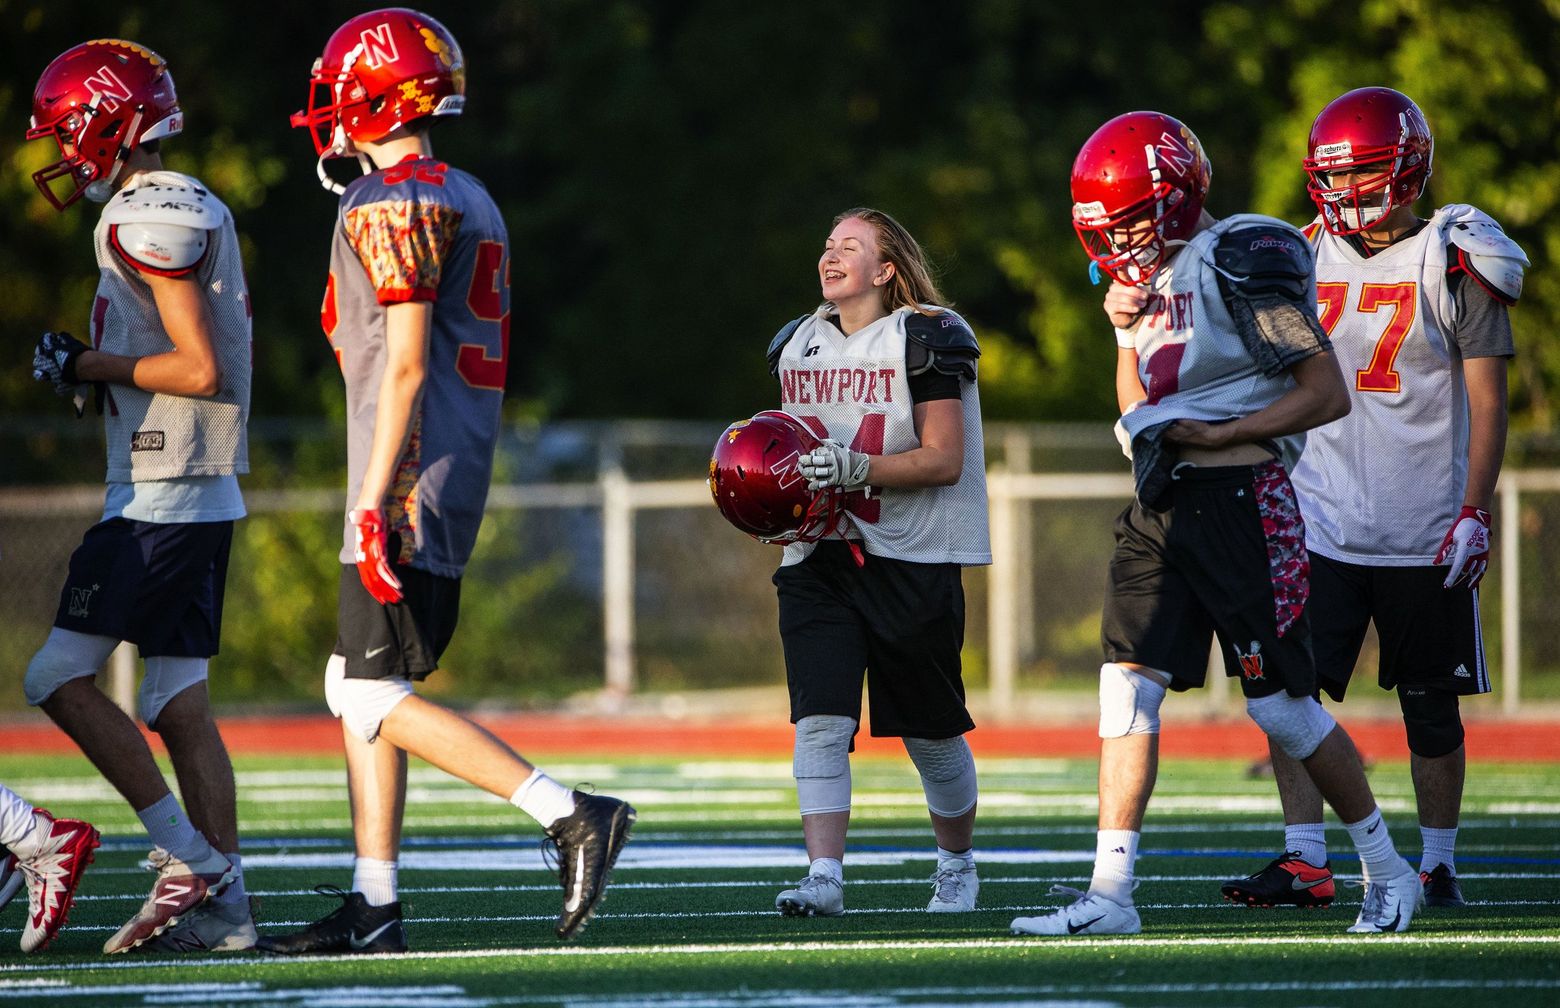 A battle for respect, then in the trenches: For Newport's Jenna Martz,  football is feminism | The Seattle Times